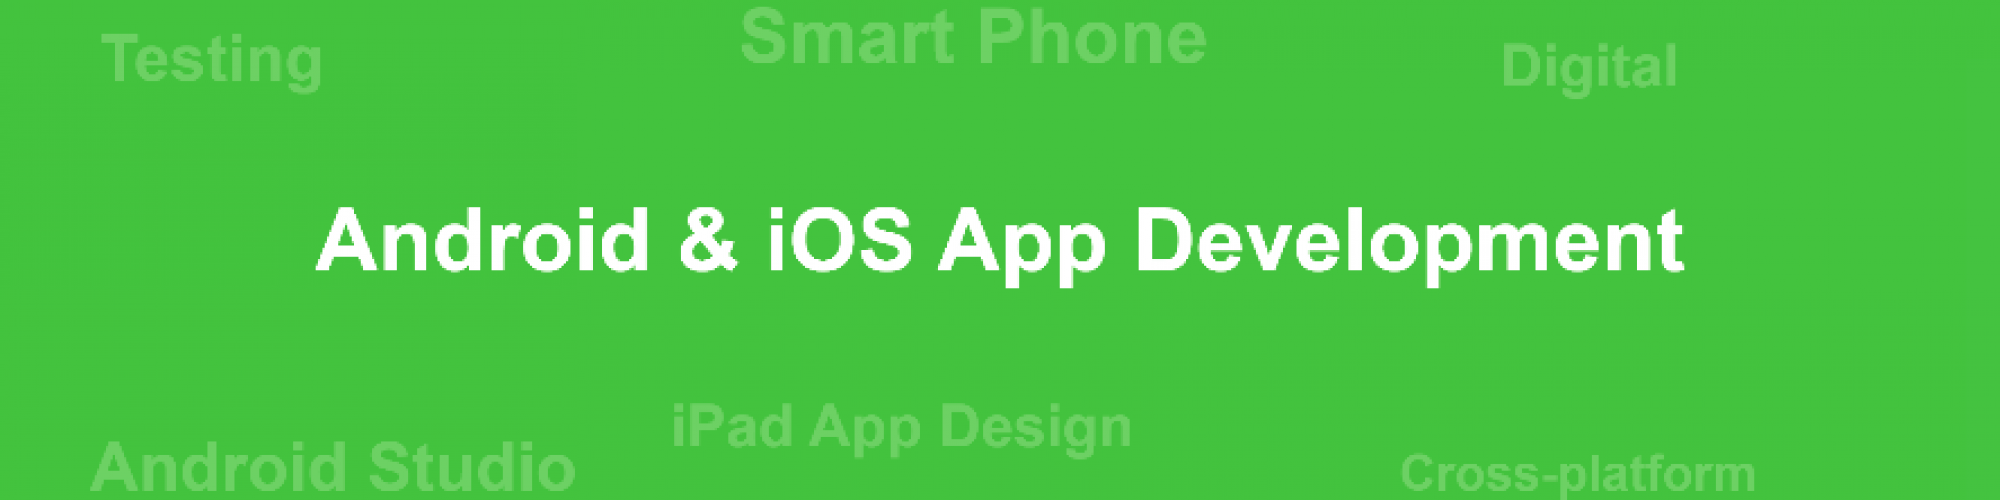 Android & iOS App